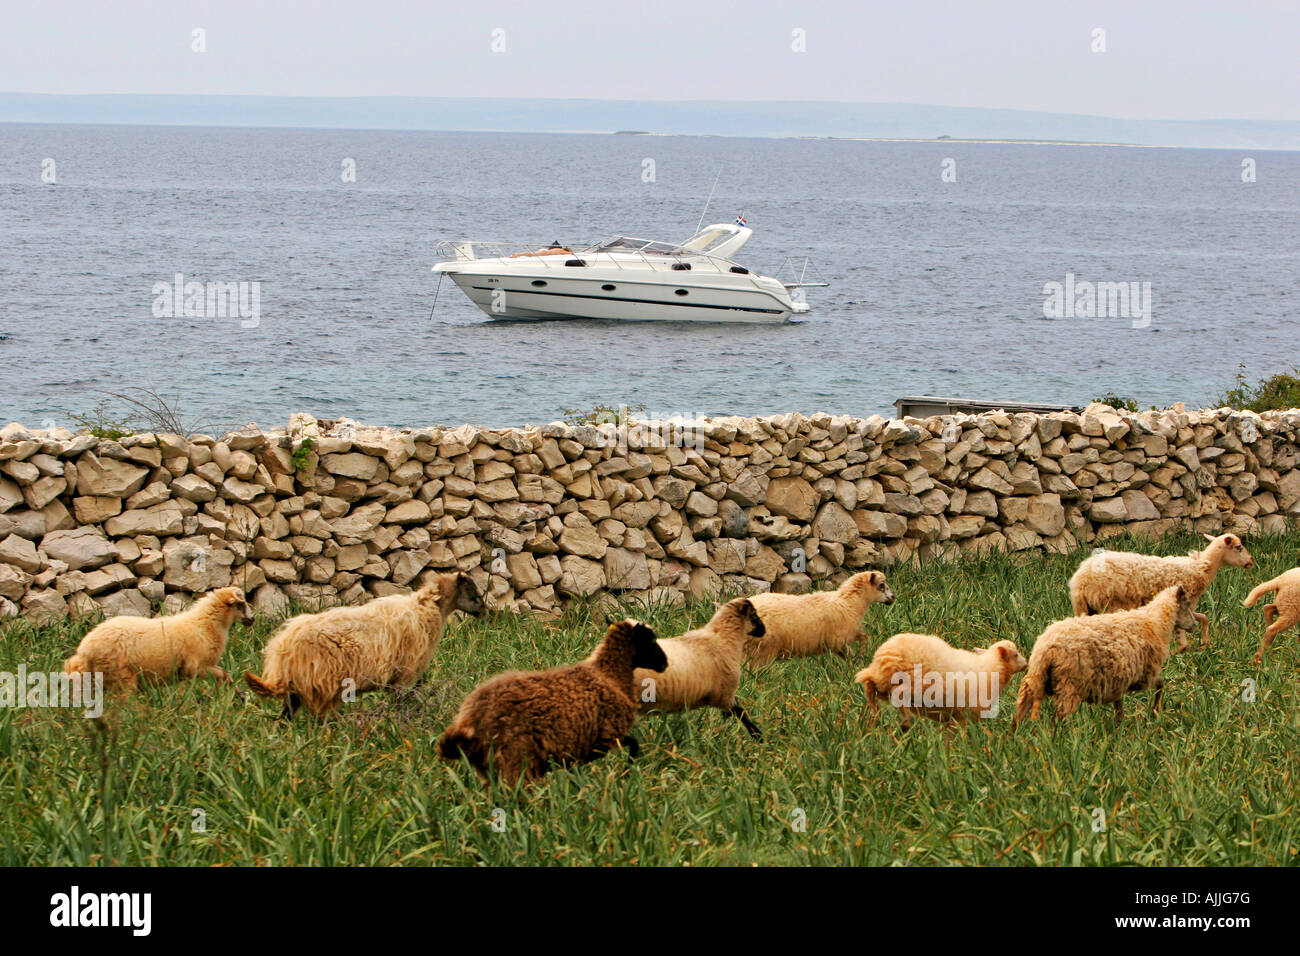 Kroatien Insel Pag 25 05 2007 Schafe auf der Insel Pag Croatia 25 05 2007 Sheeps on the Isle of Pag Stock Photo